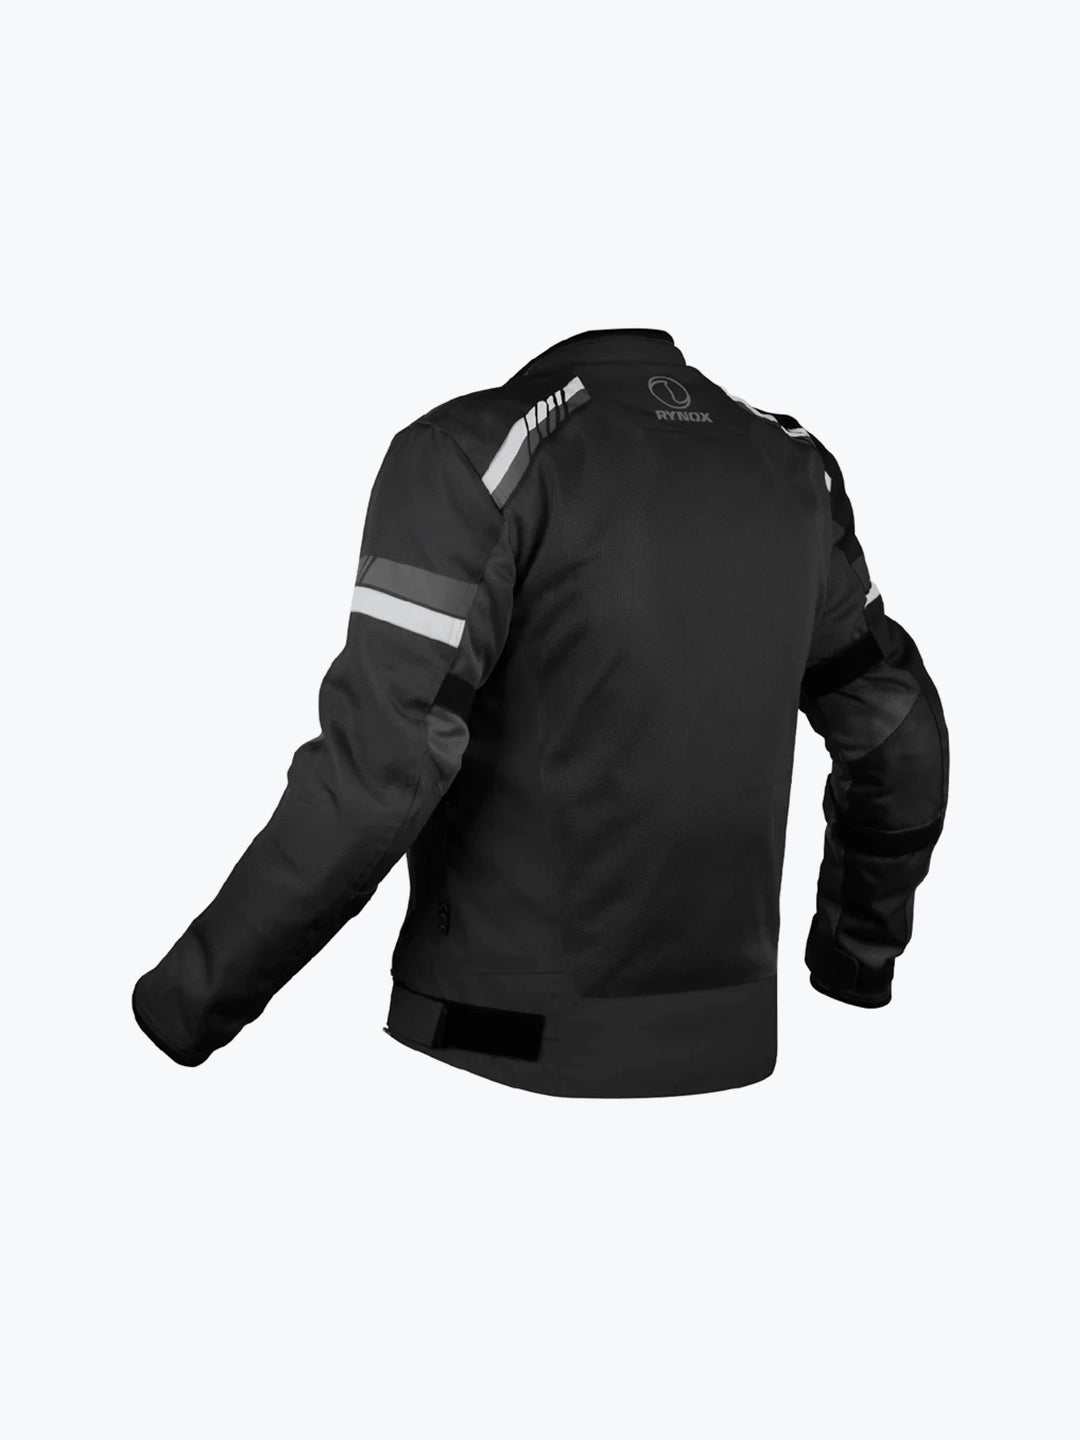 RYNOX AIR GT 3 RIDING JACKET | Buy RYNOX AIR GT 3 RIDING JACKET Online at  Best Price from Riders Junction